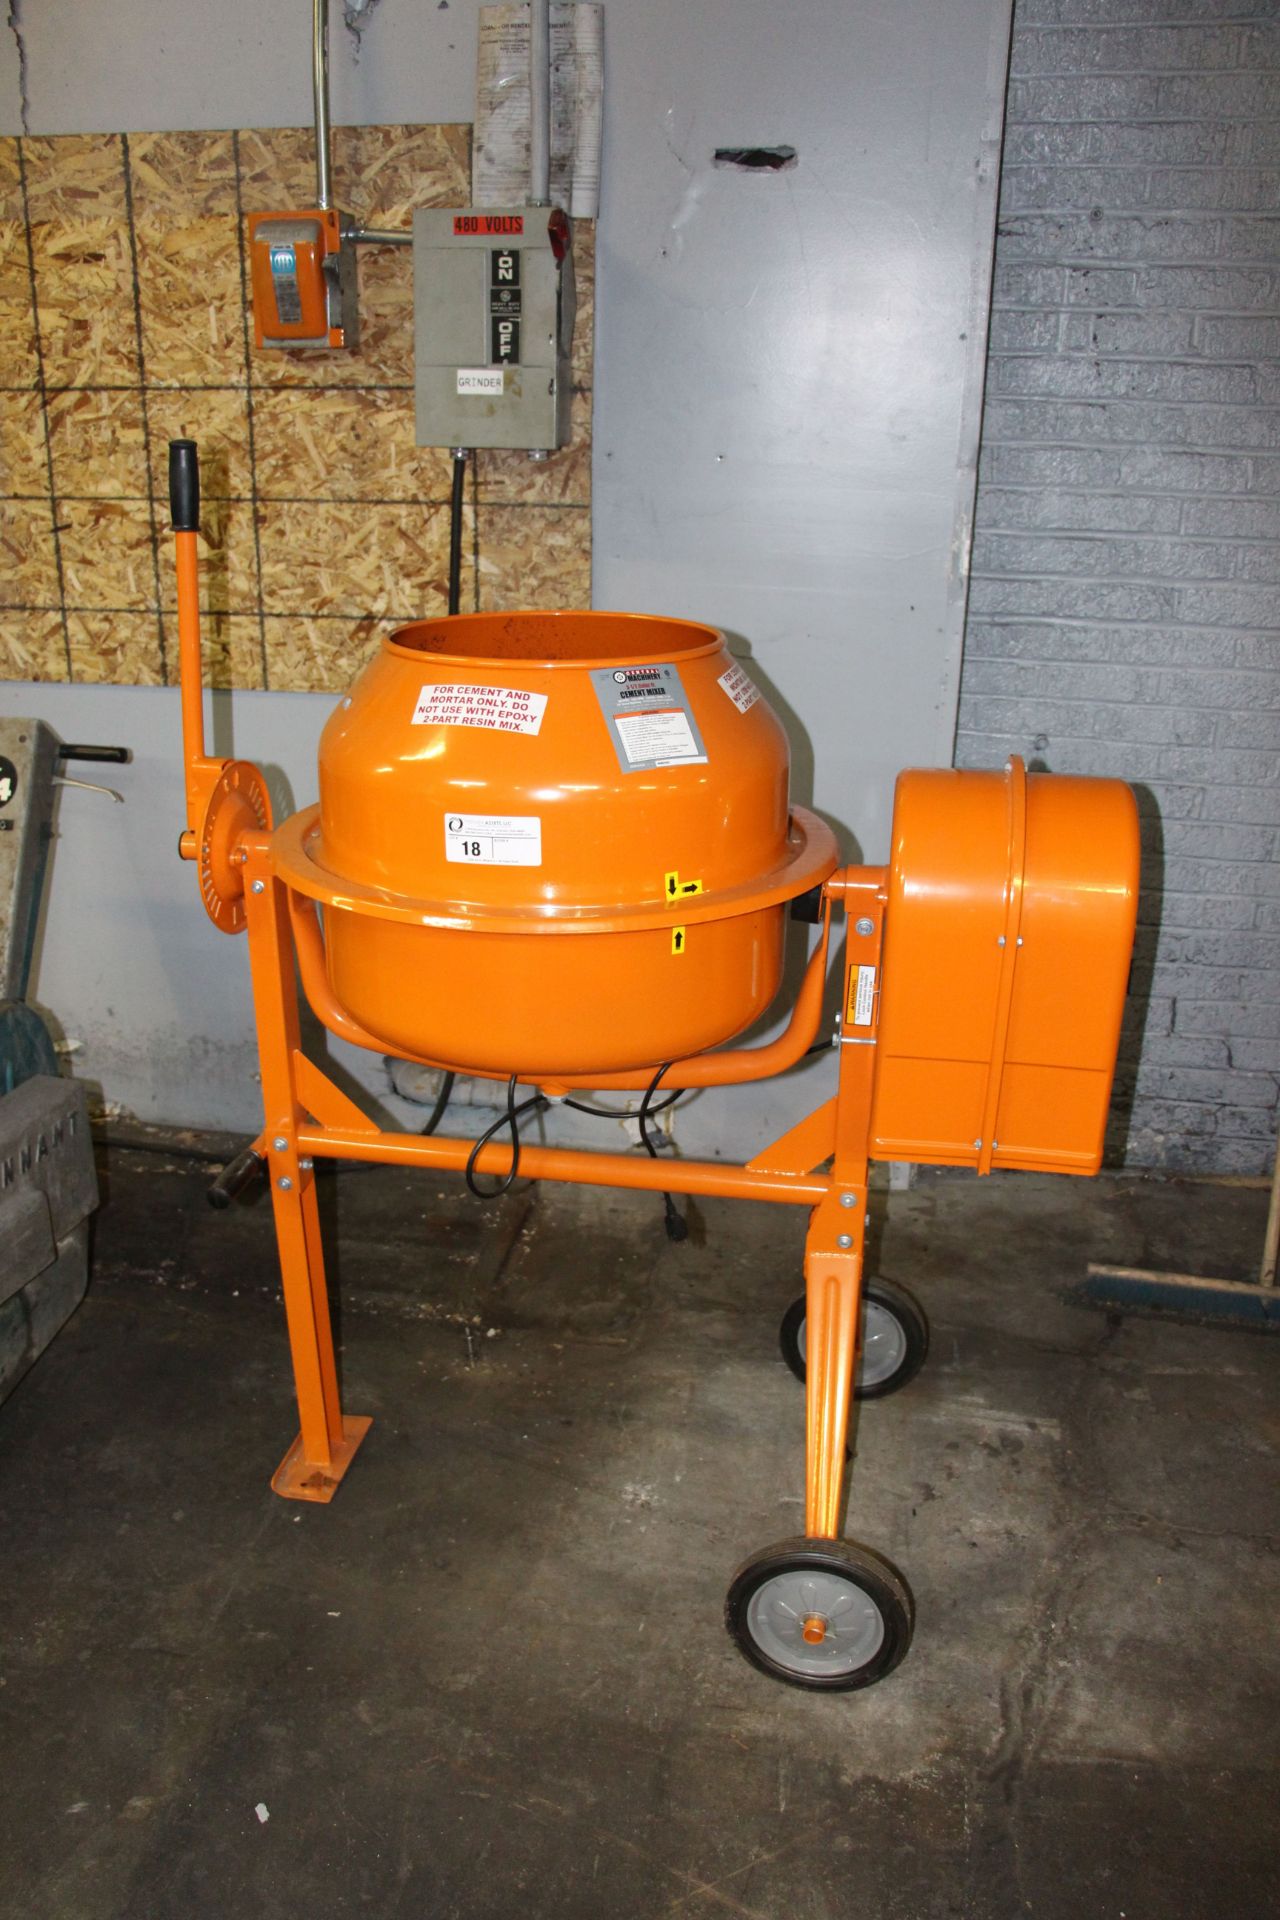 Central Machinery 3 1/2 foot cement mixer, 1820 RPM / 15" drum